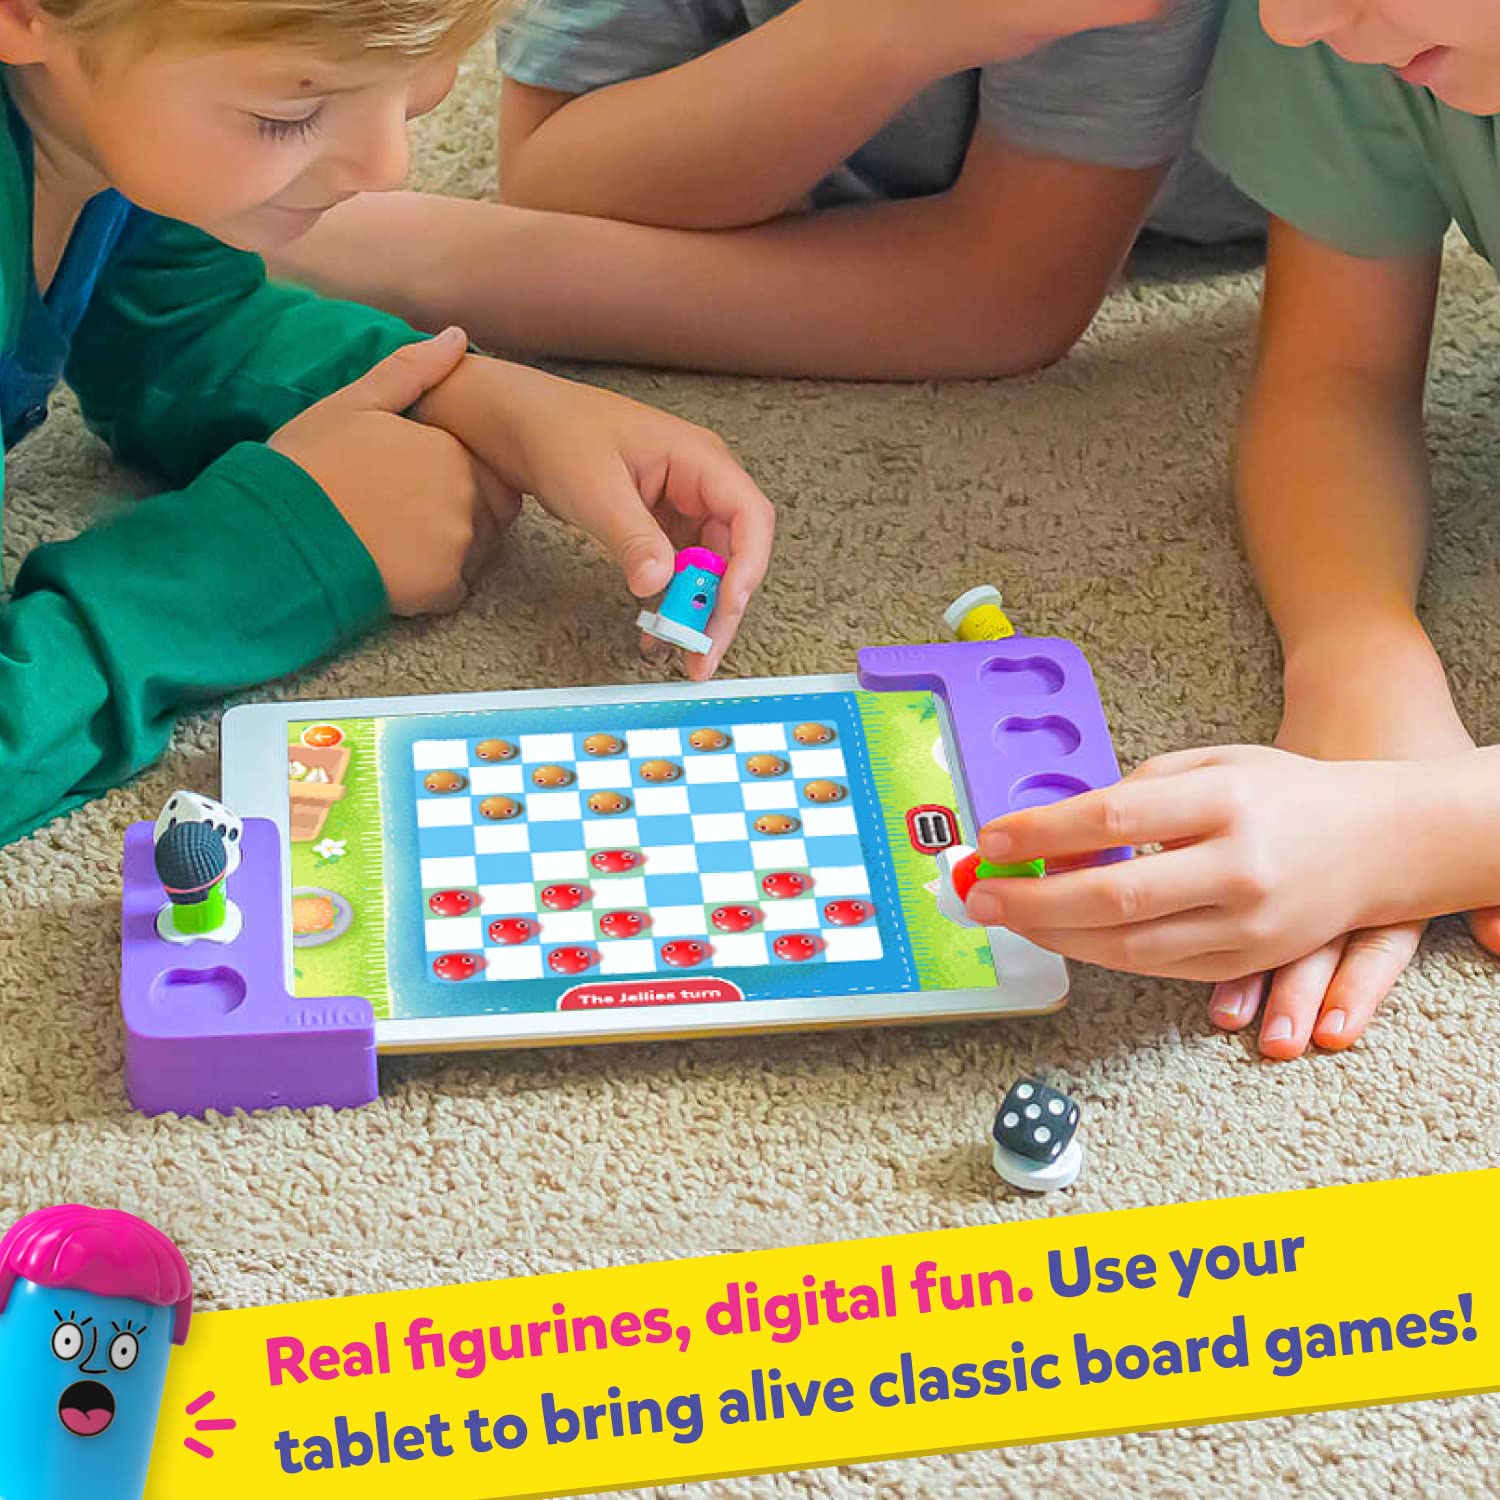 PlayShifu Tacto Classics - 4in1 Digital Board Games - Ludo, Checkers, Ladders, Tic Tac Toe for Kids Ages 4 Years & Up